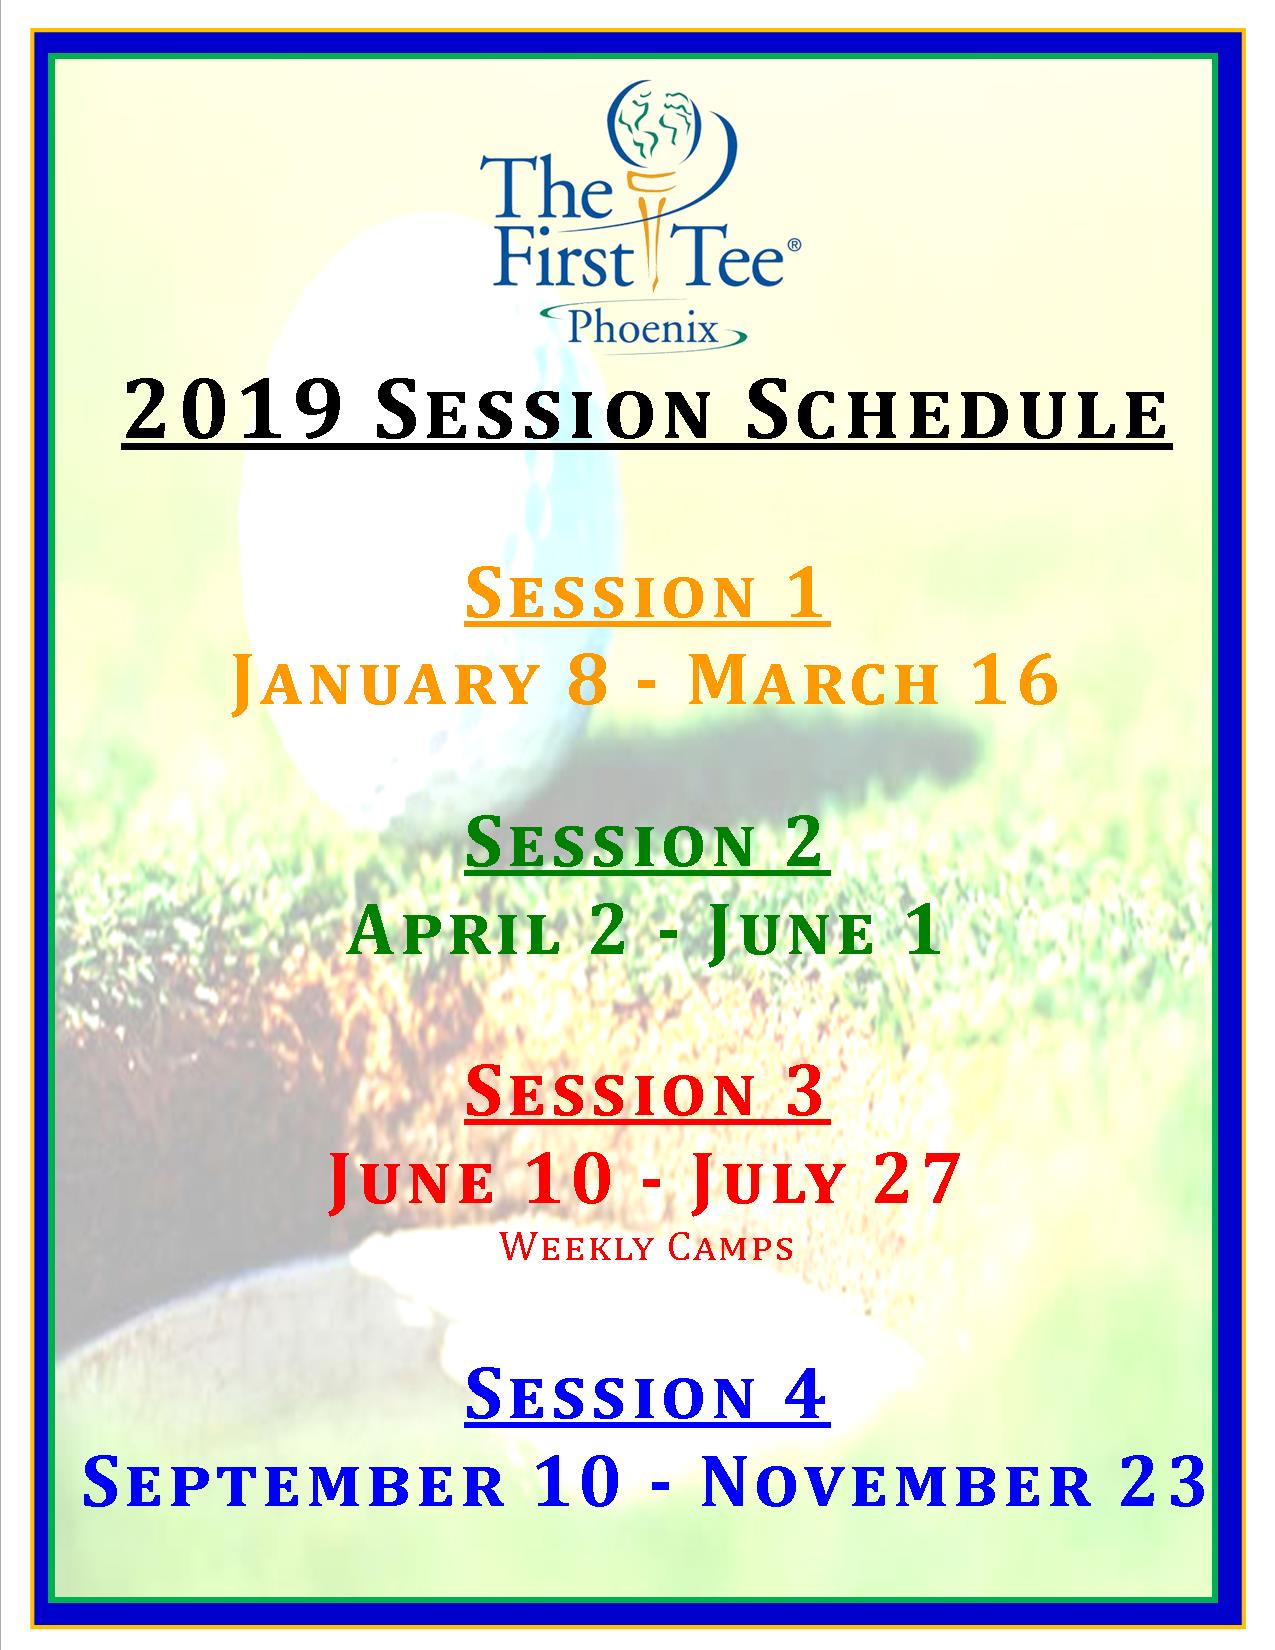 2019 Session Schedule First Tee Phoenix